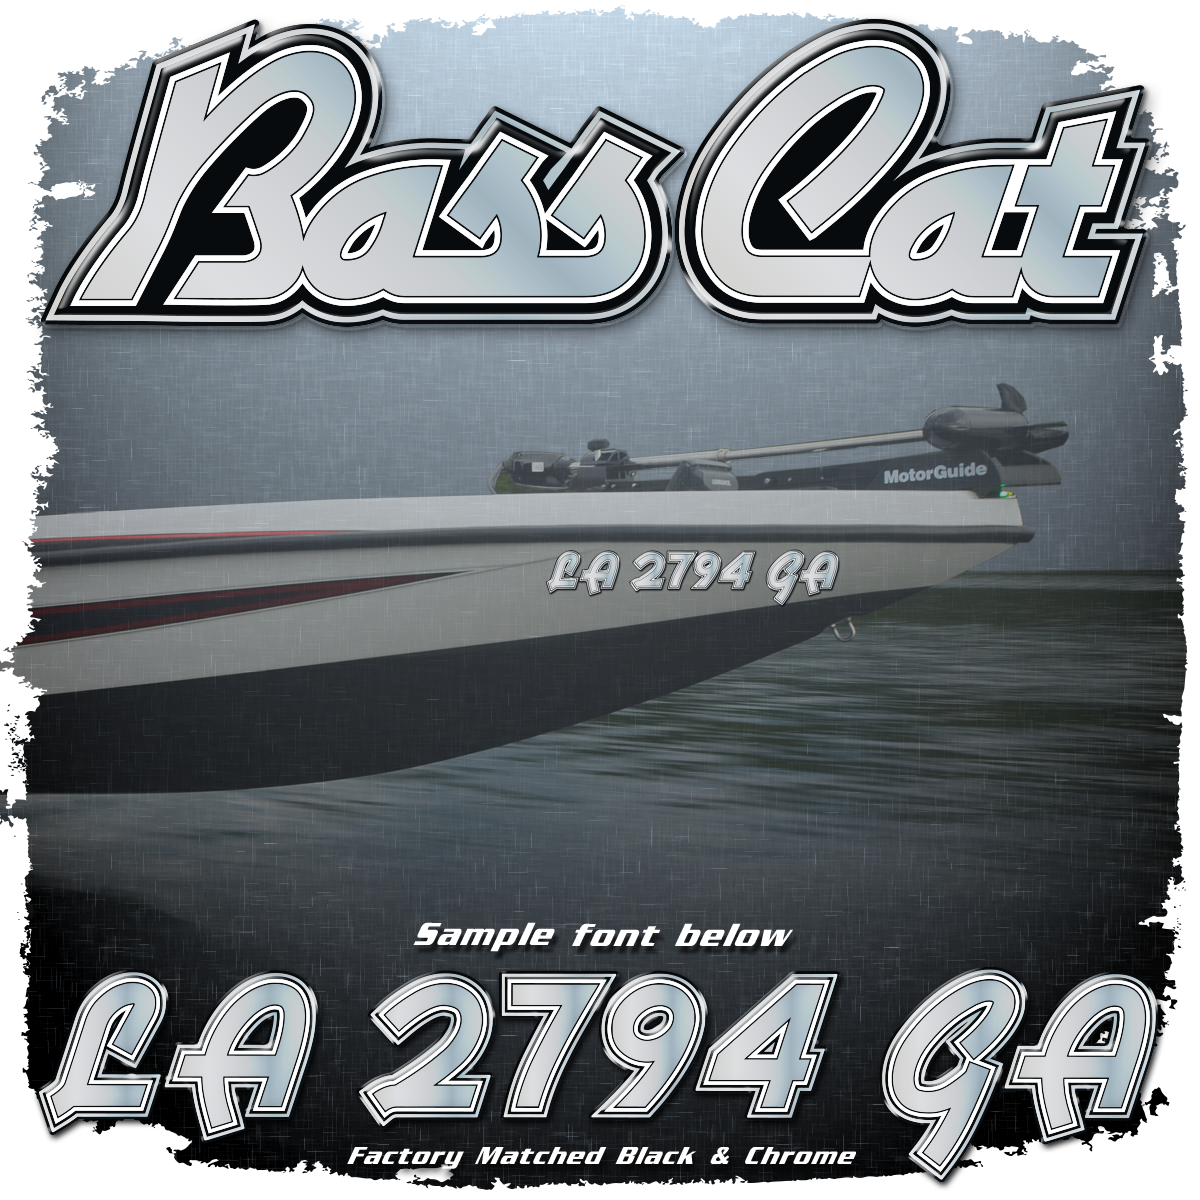 Bass Cat Registration (2 included), Factory Matched to Bass Cat logo